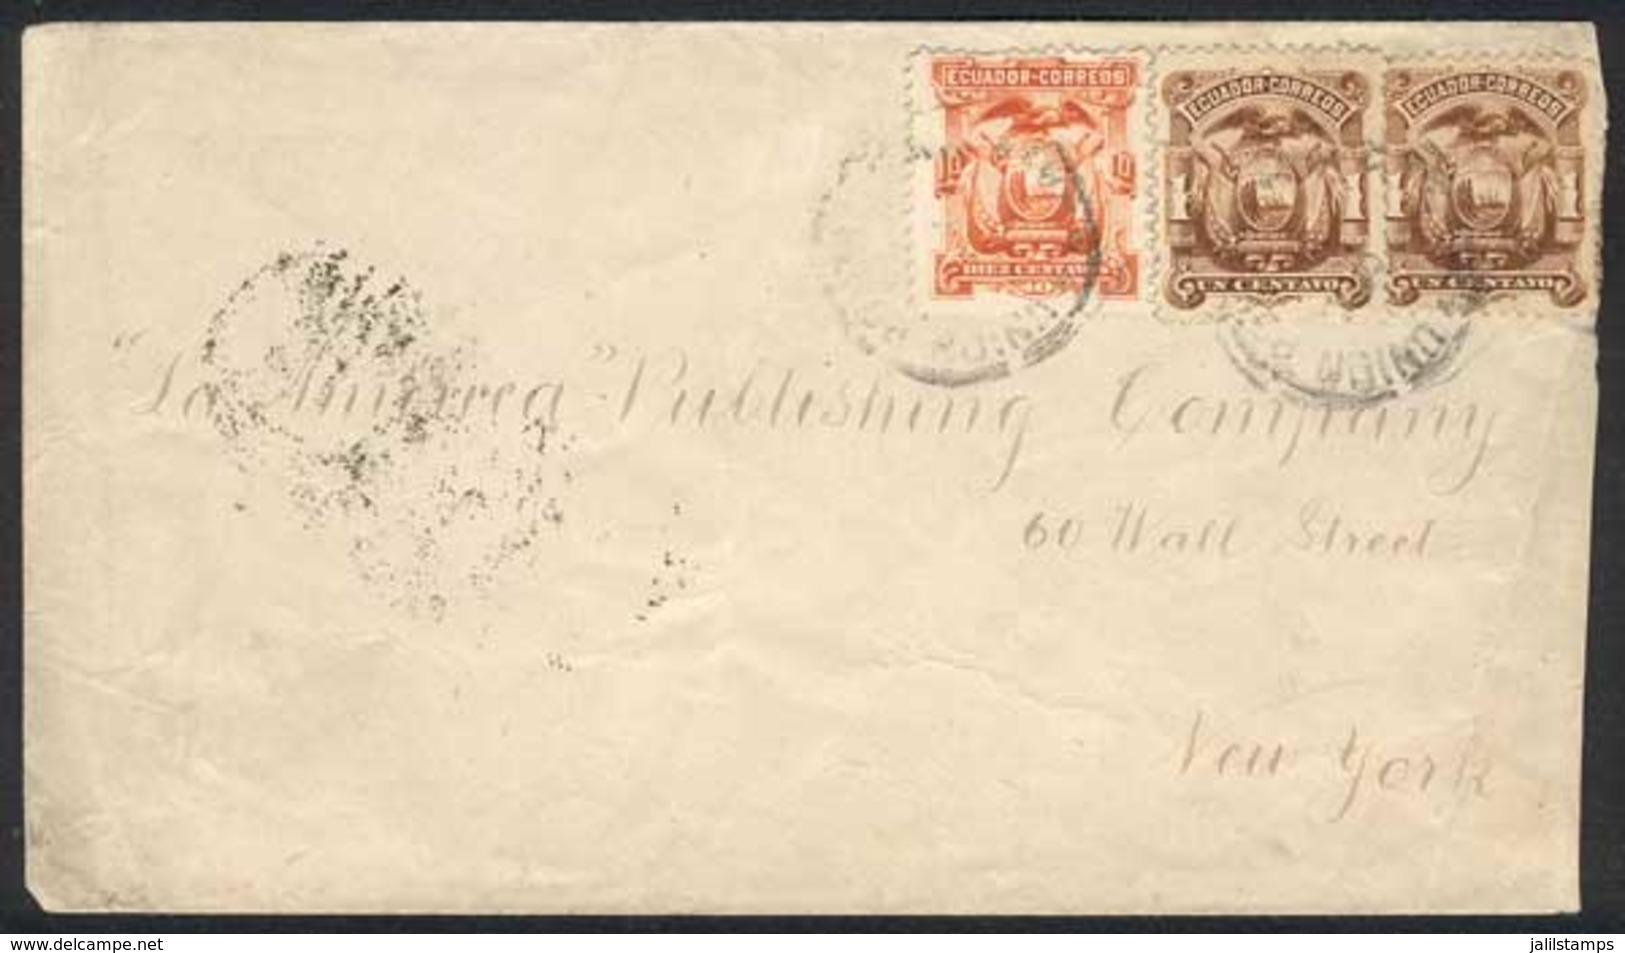 ECUADOR: Cover Franked With 1c. Pair + 10c. (Sc.12 Pair + 15), Sent From Guayaquil To New York On 5/MAY/1890, Arrival Ba - Equateur